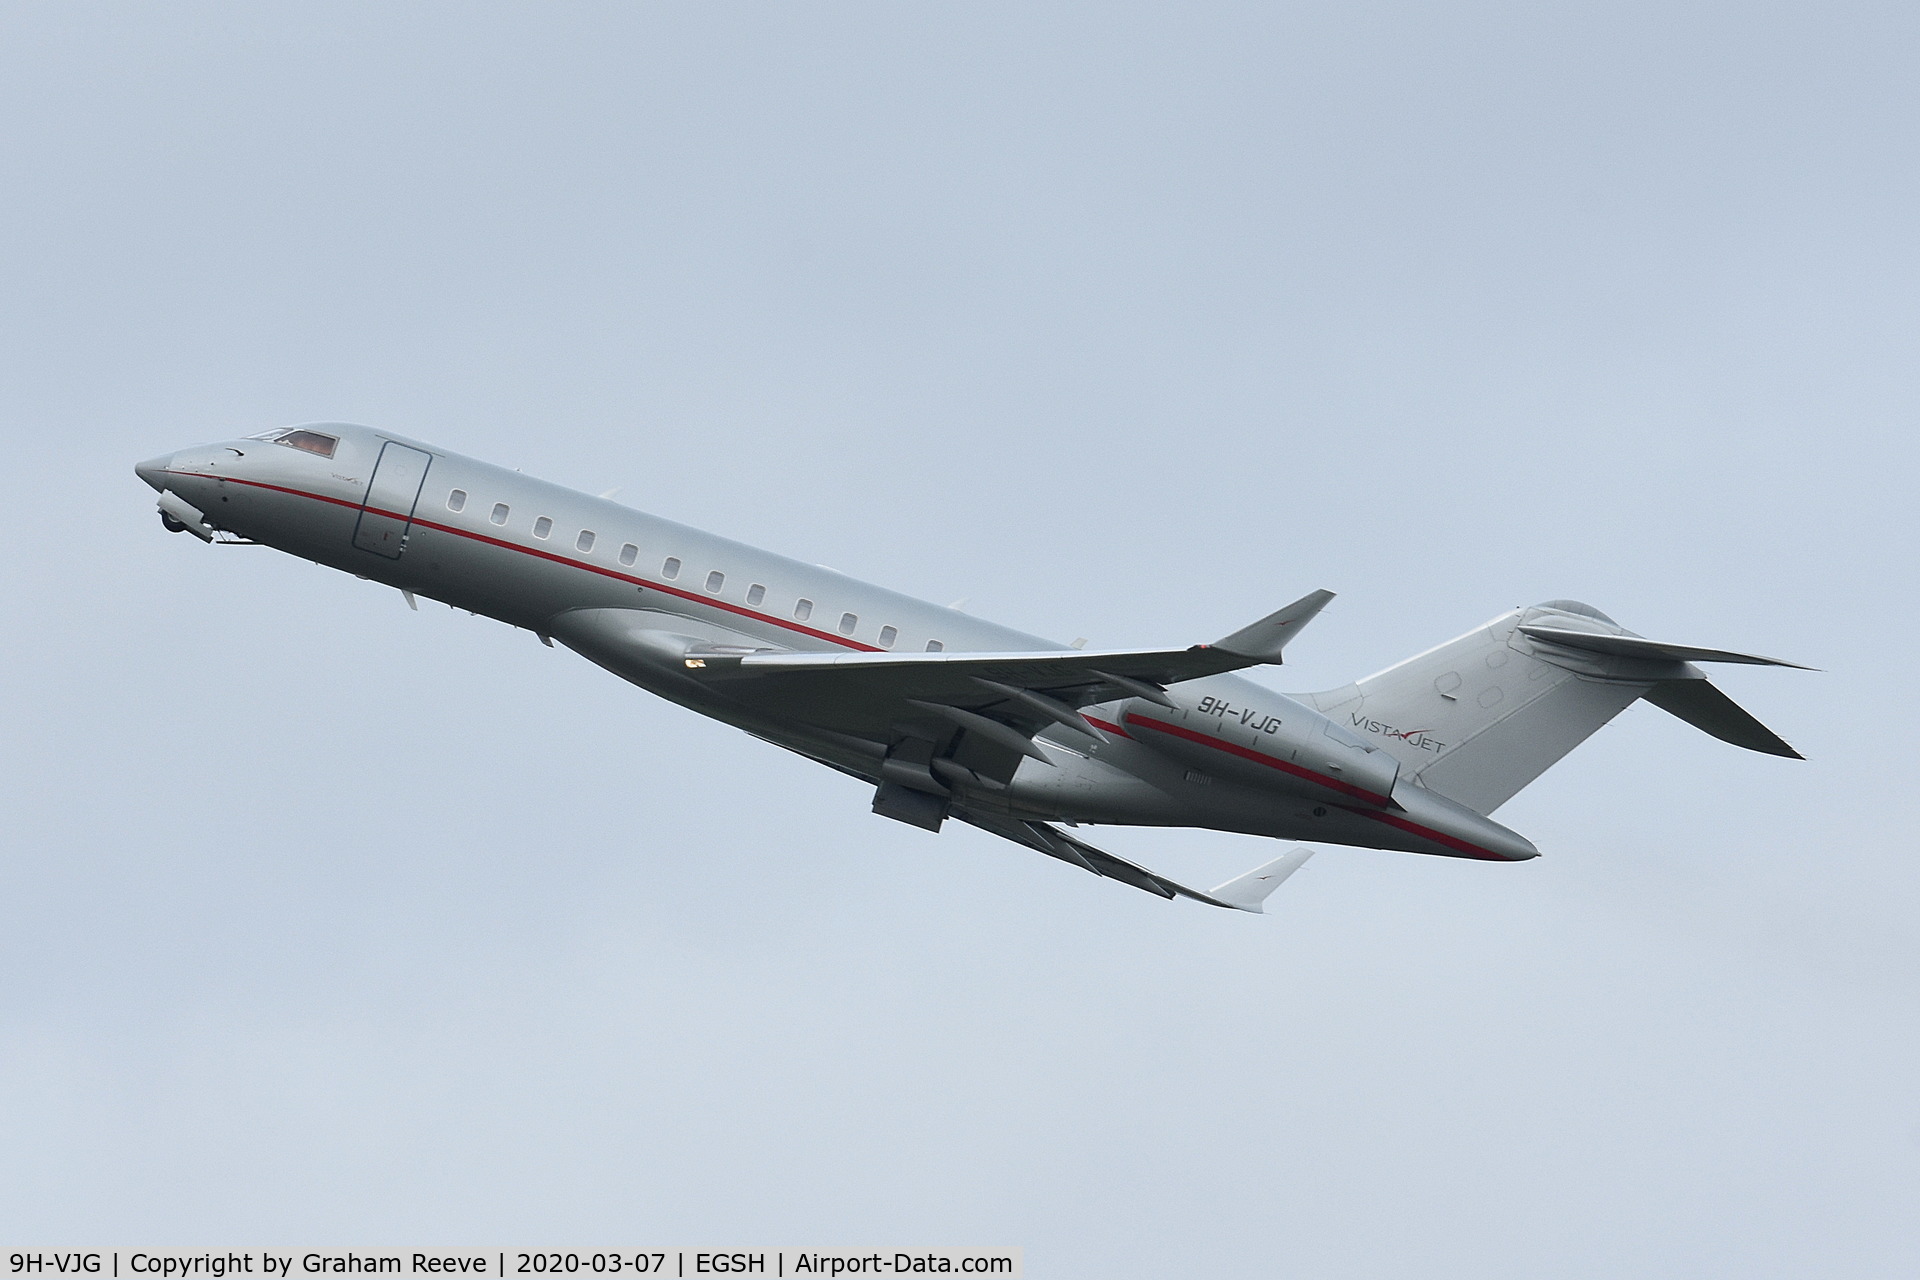 9H-VJG, 2013 Bombardier BD-700-1A10 Global 6000 C/N 9580, Departing from Norwich.